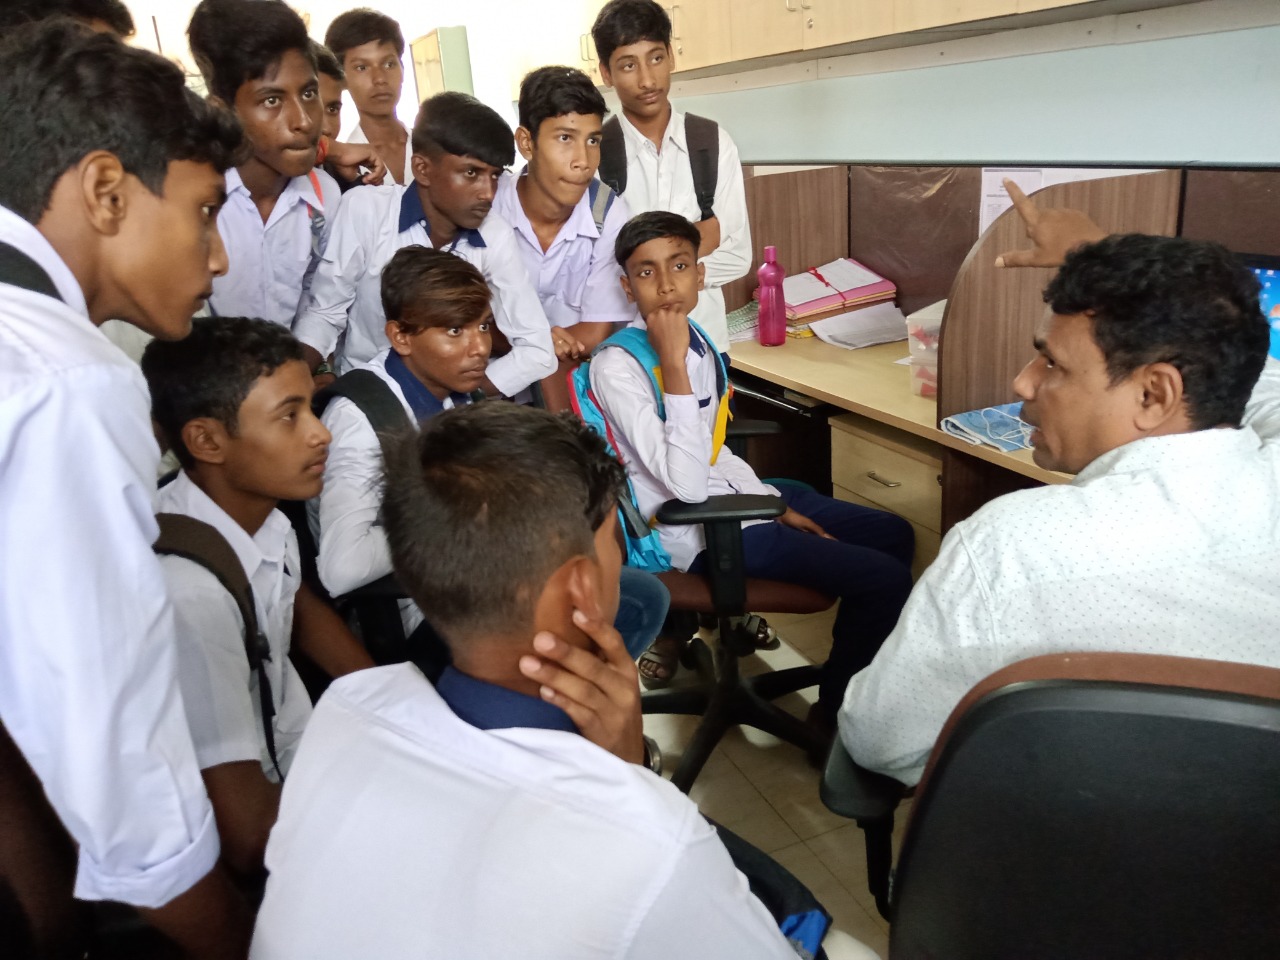 Industry expert Mr. Subrata Das introduced them and shared knowledge about the  IT industry.